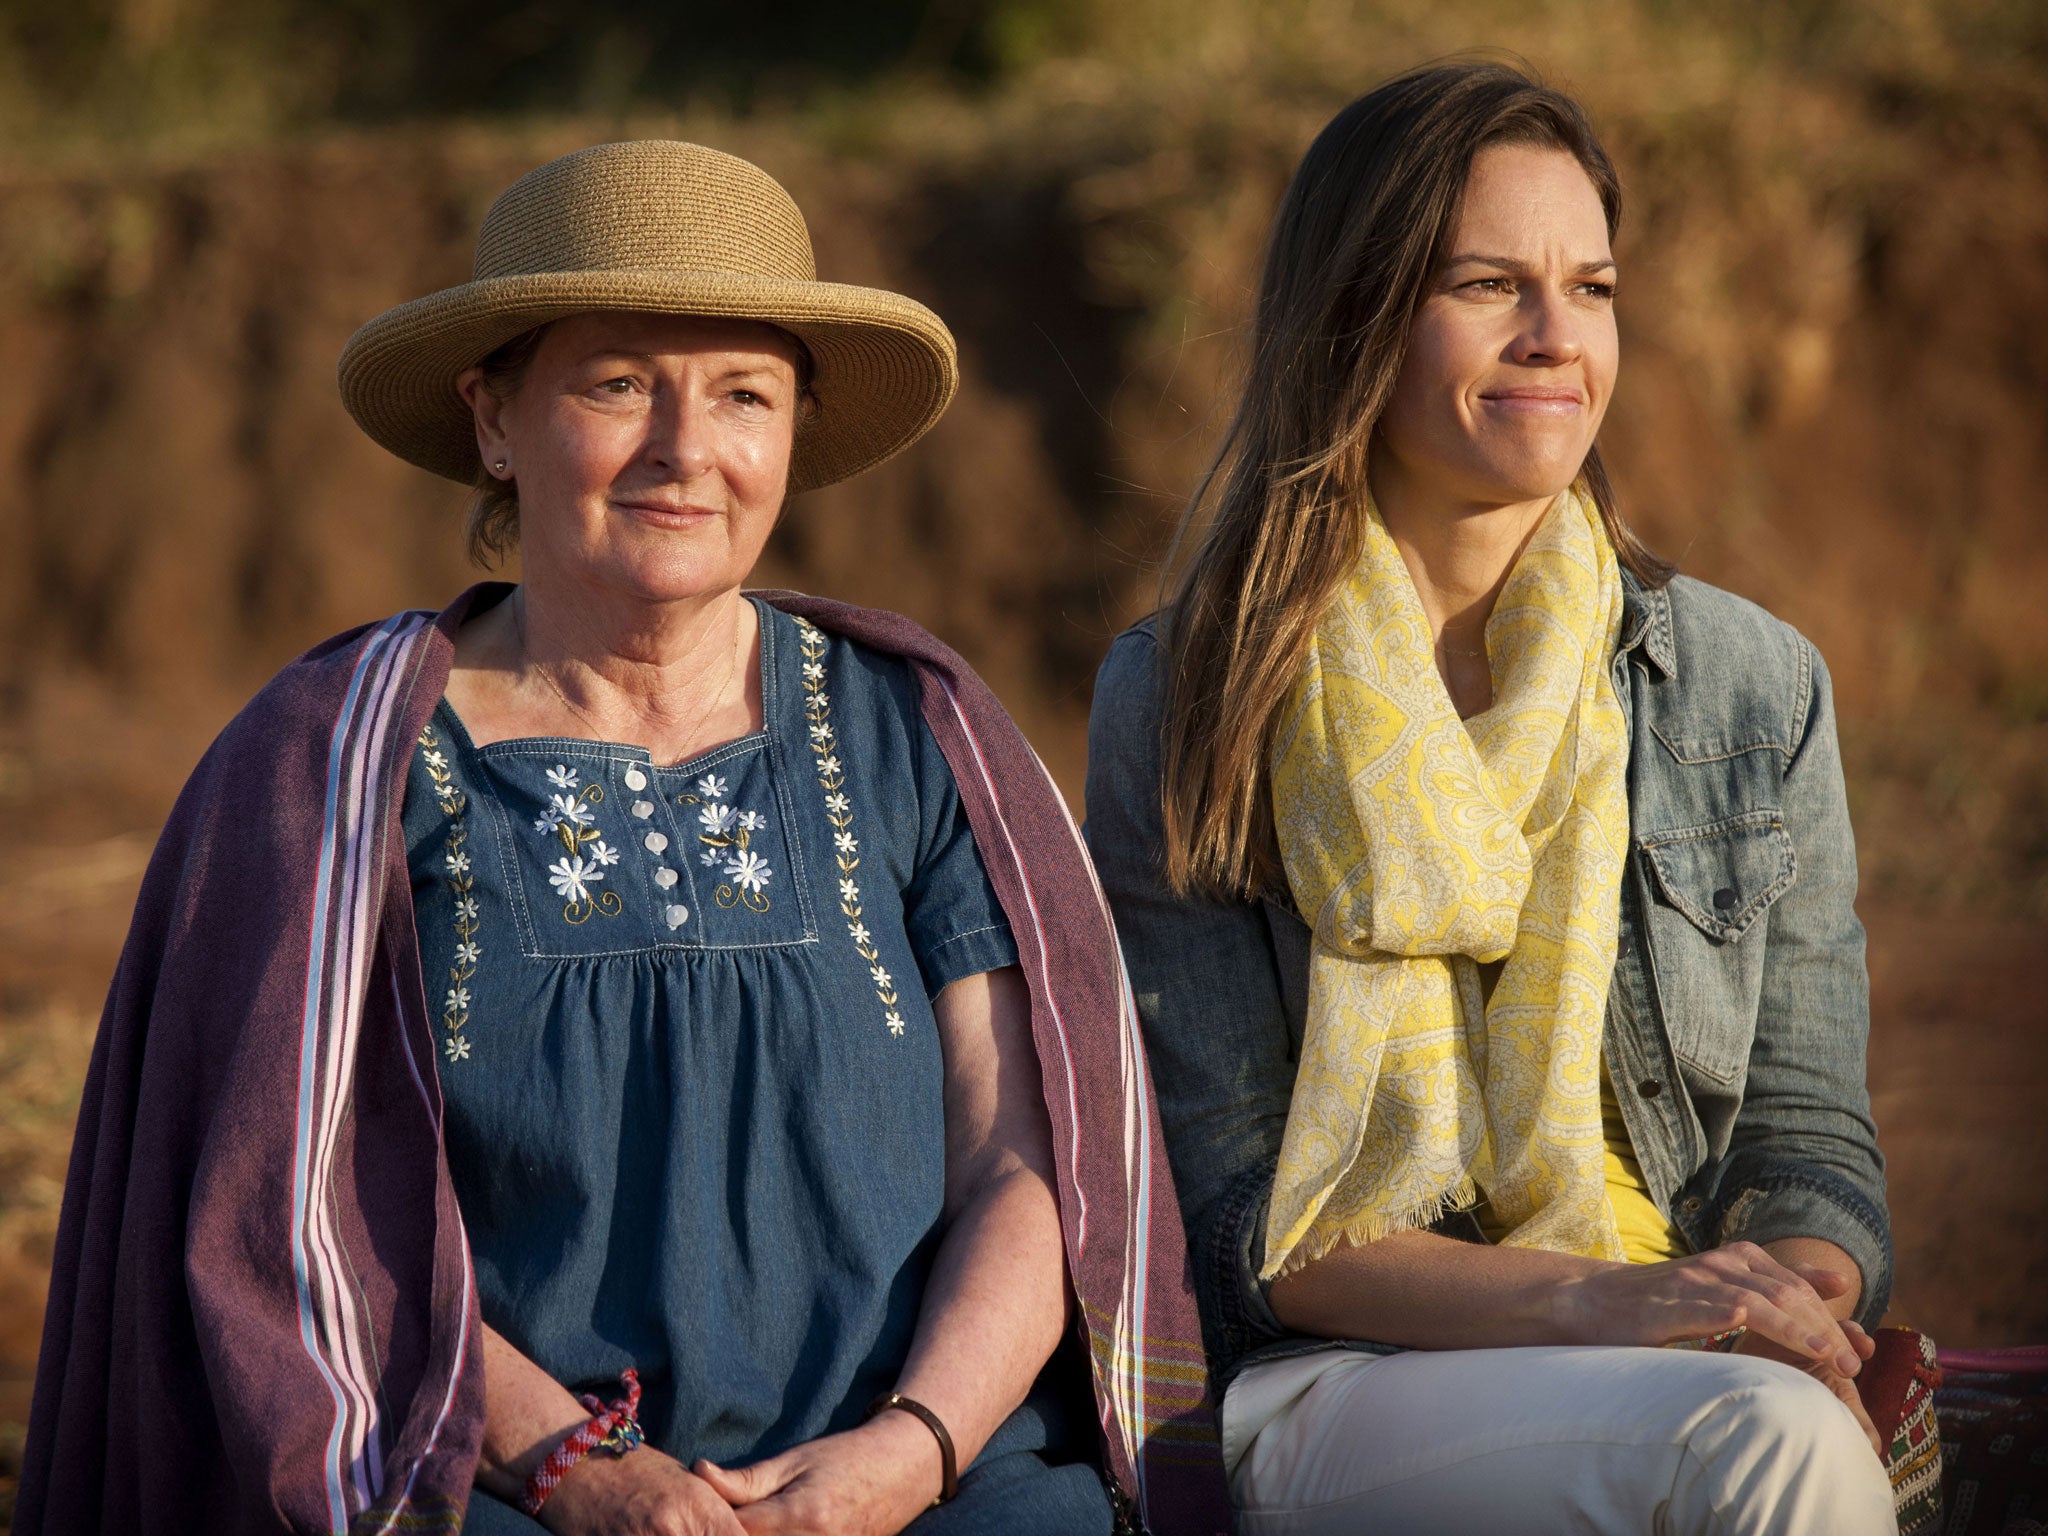 On a mission: Hilary Swank, right, and Brenda Blethyn as Mary and Martha